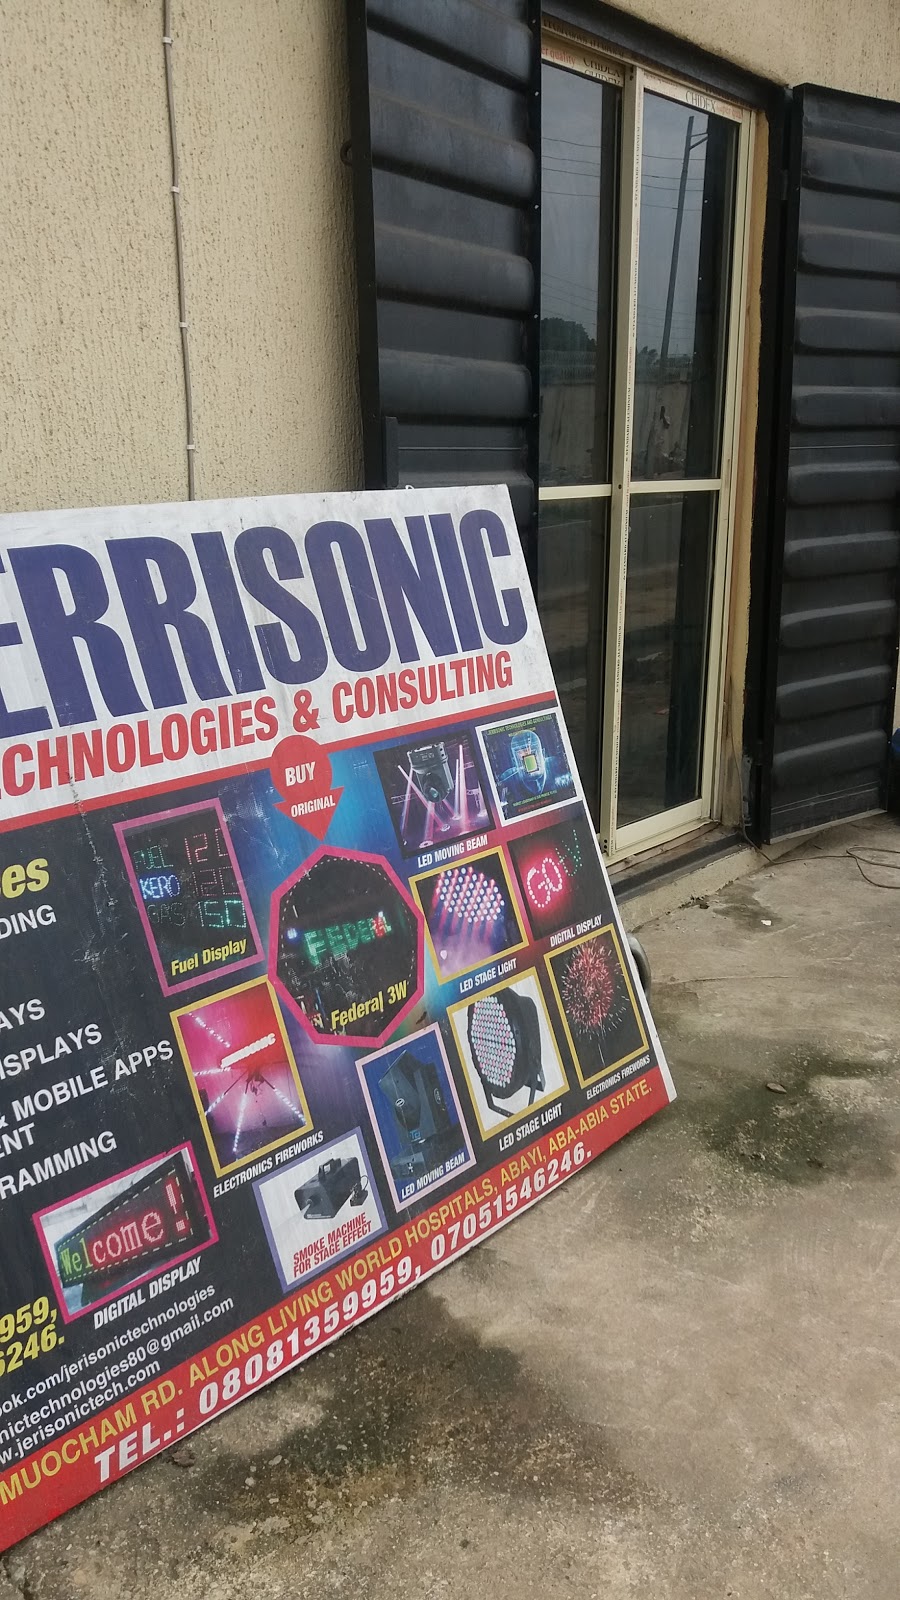 Jerrisonic Technologies And Consulting